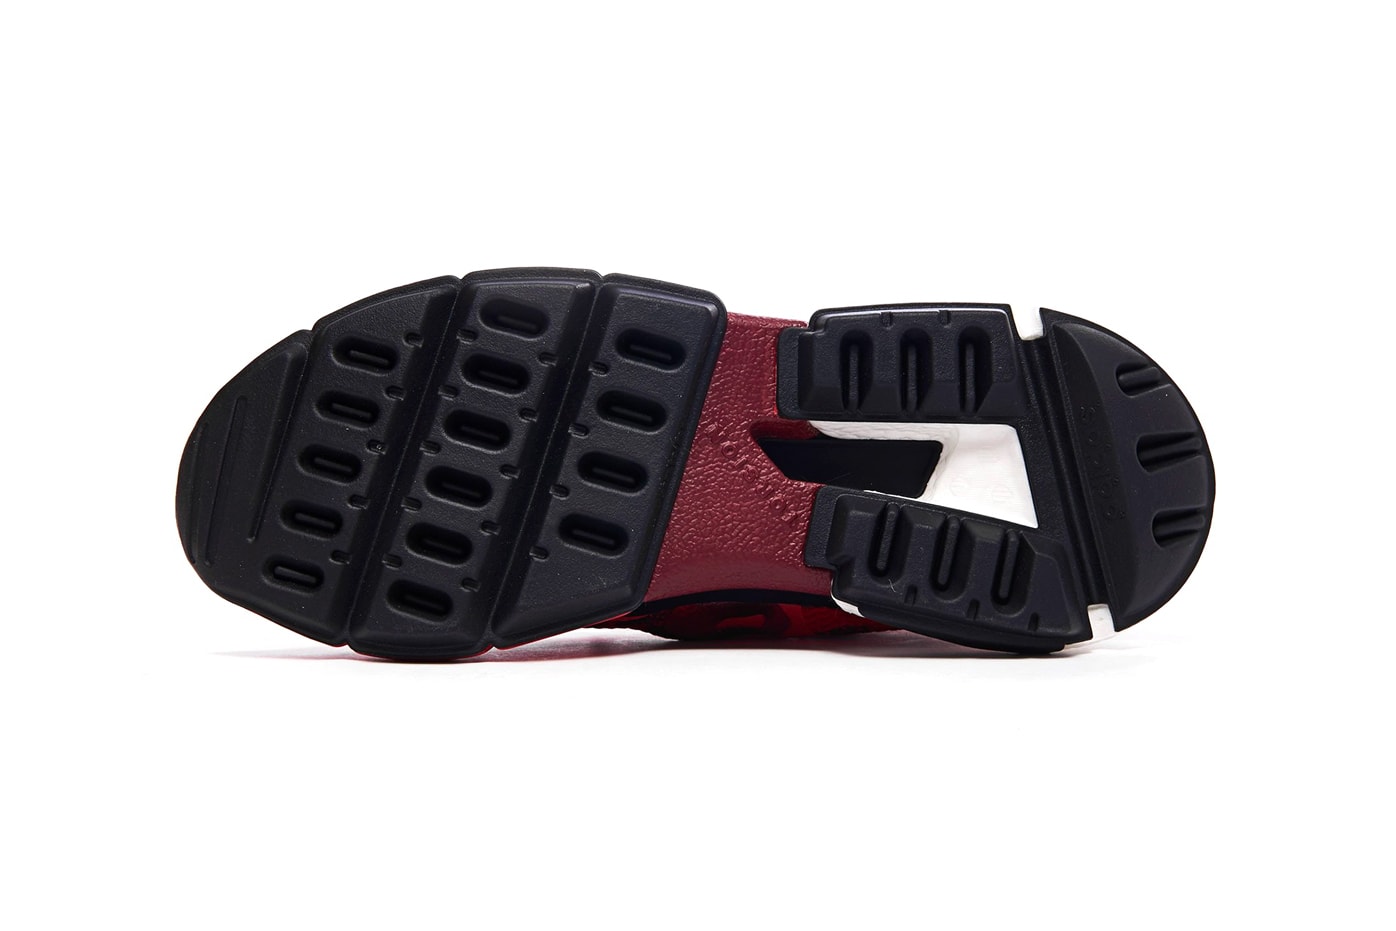 adidas Originals POD S3 2 Scarlet red burgundy wine mesh uppers suede Boost technology sneakers rubber